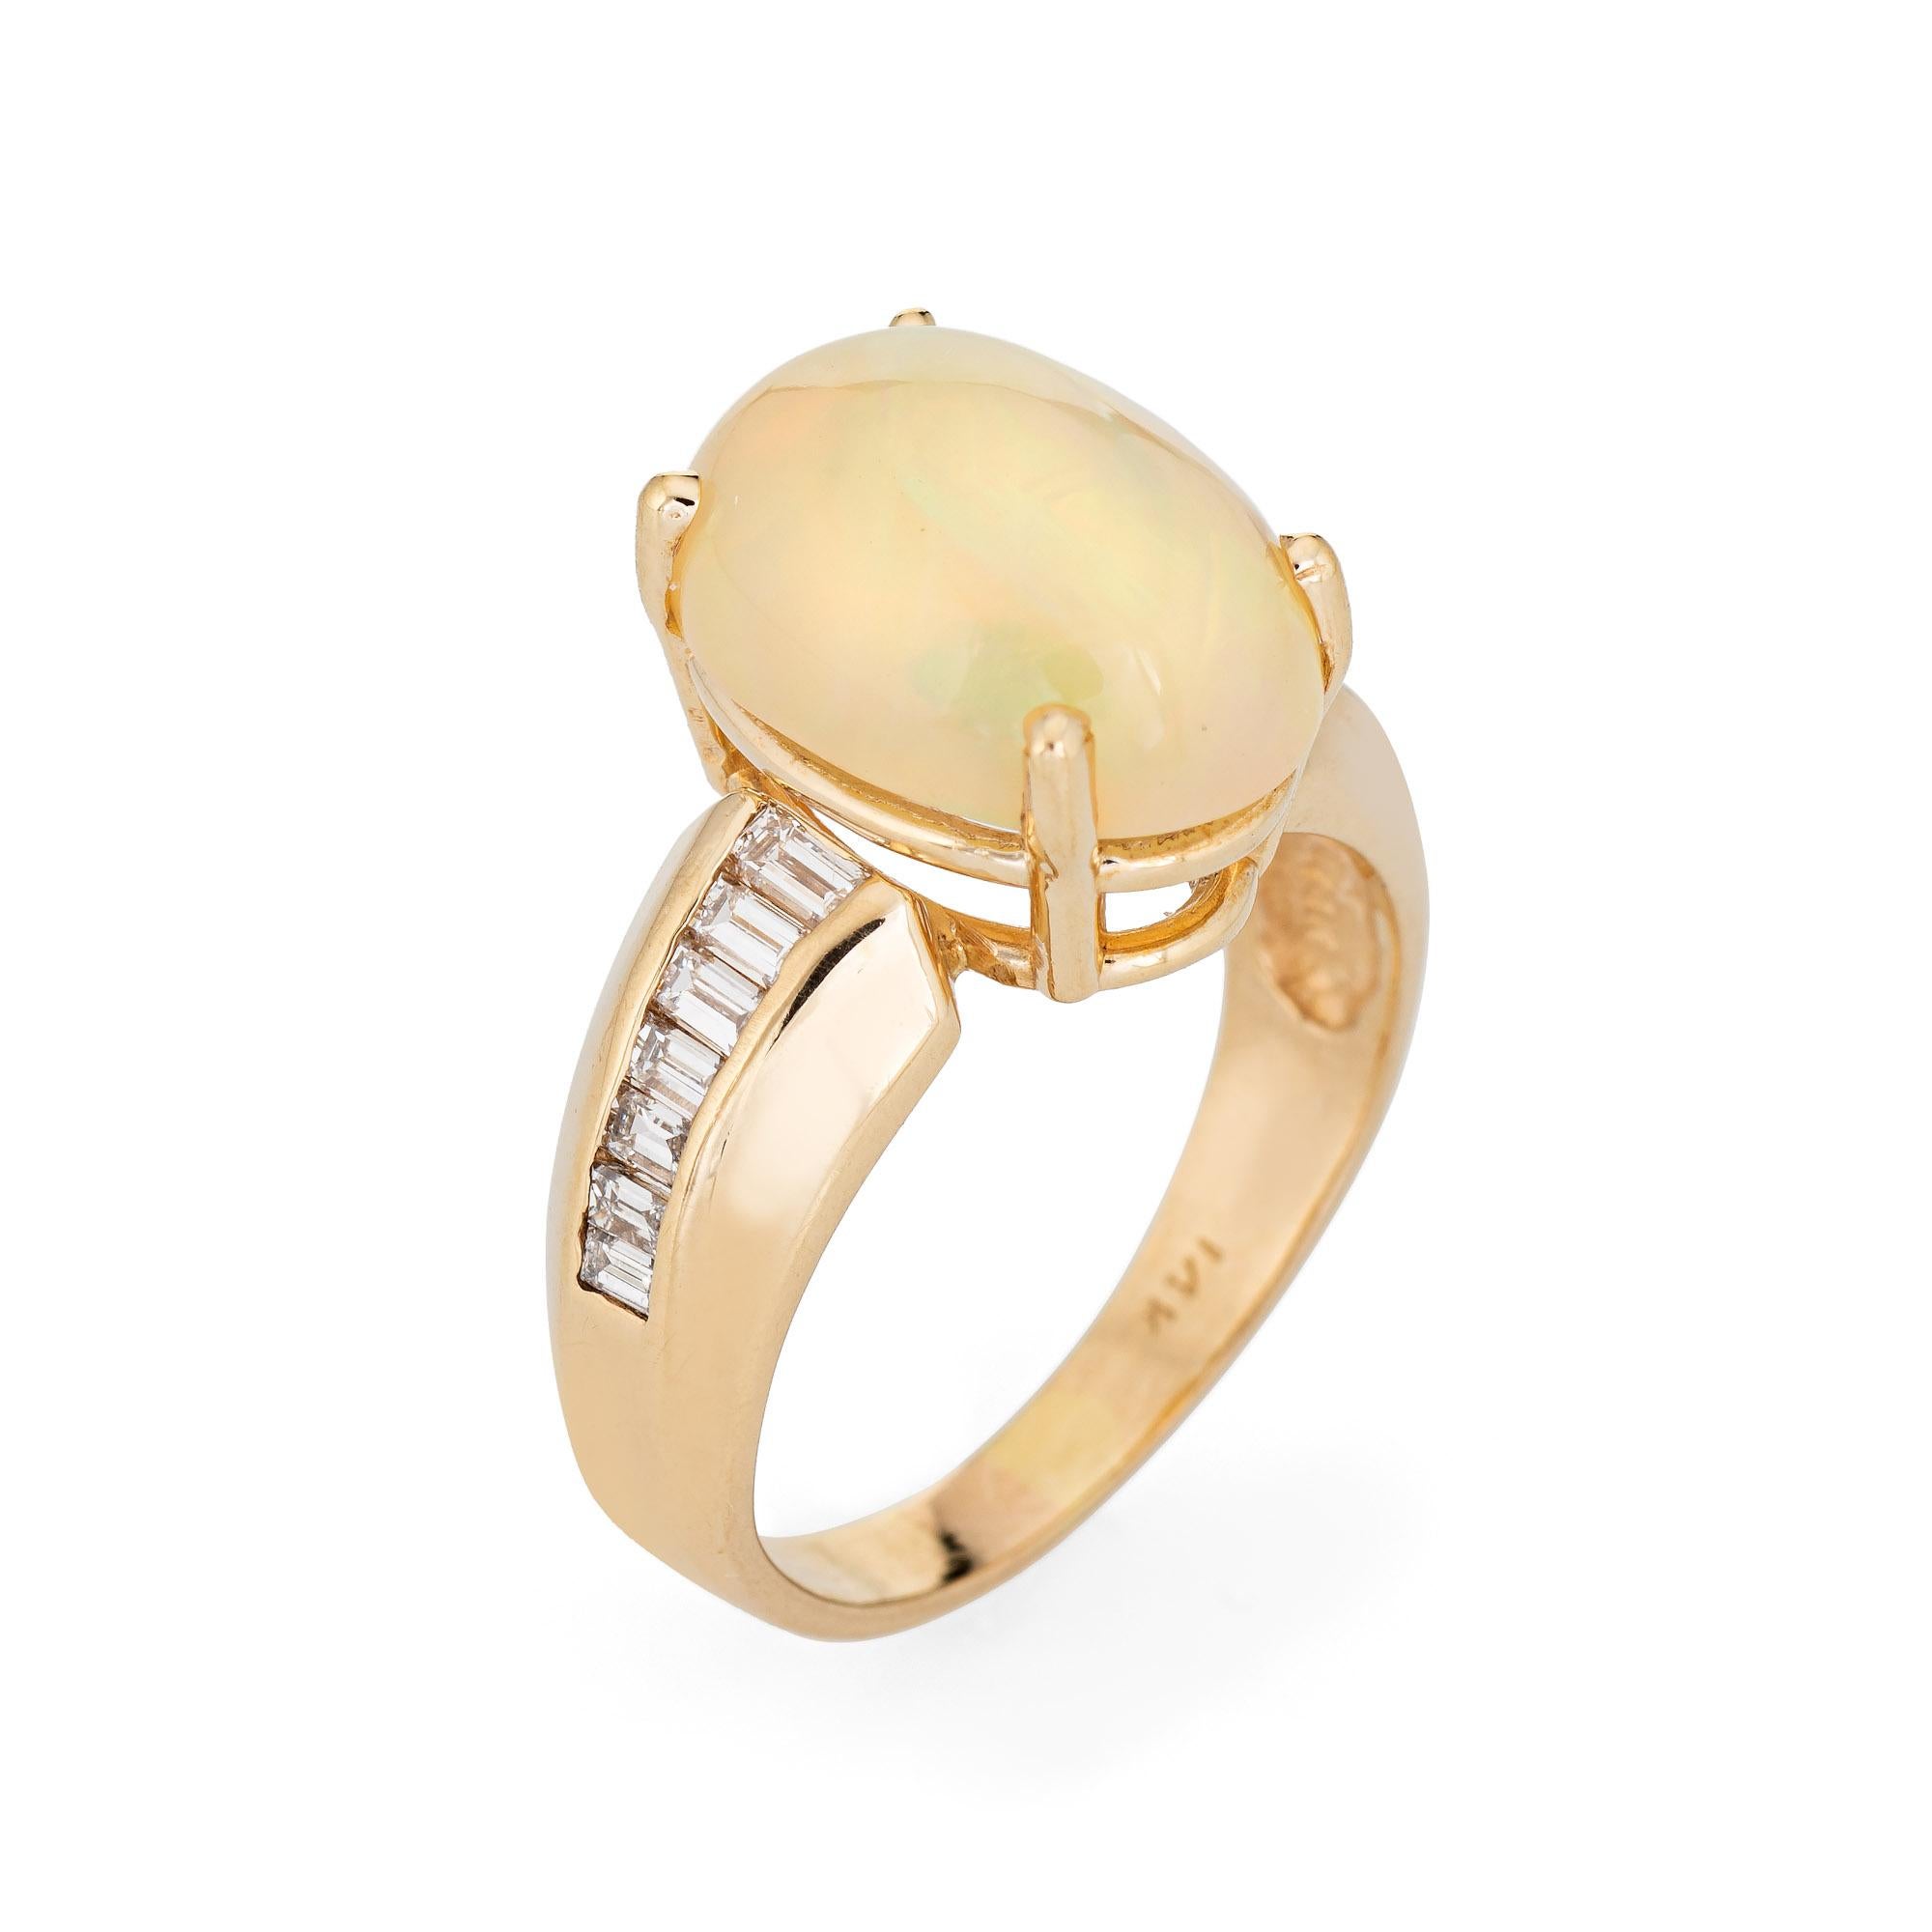 Stylish vintage opal & diamond cocktail ring crafted in 14 karat yellow gold. 

The natural opal measures 14mm x 10mm (estimated at 5 carats), accented with an estimated 0.75 carats of straight baguette cut diamonds (estimated at H-I color and